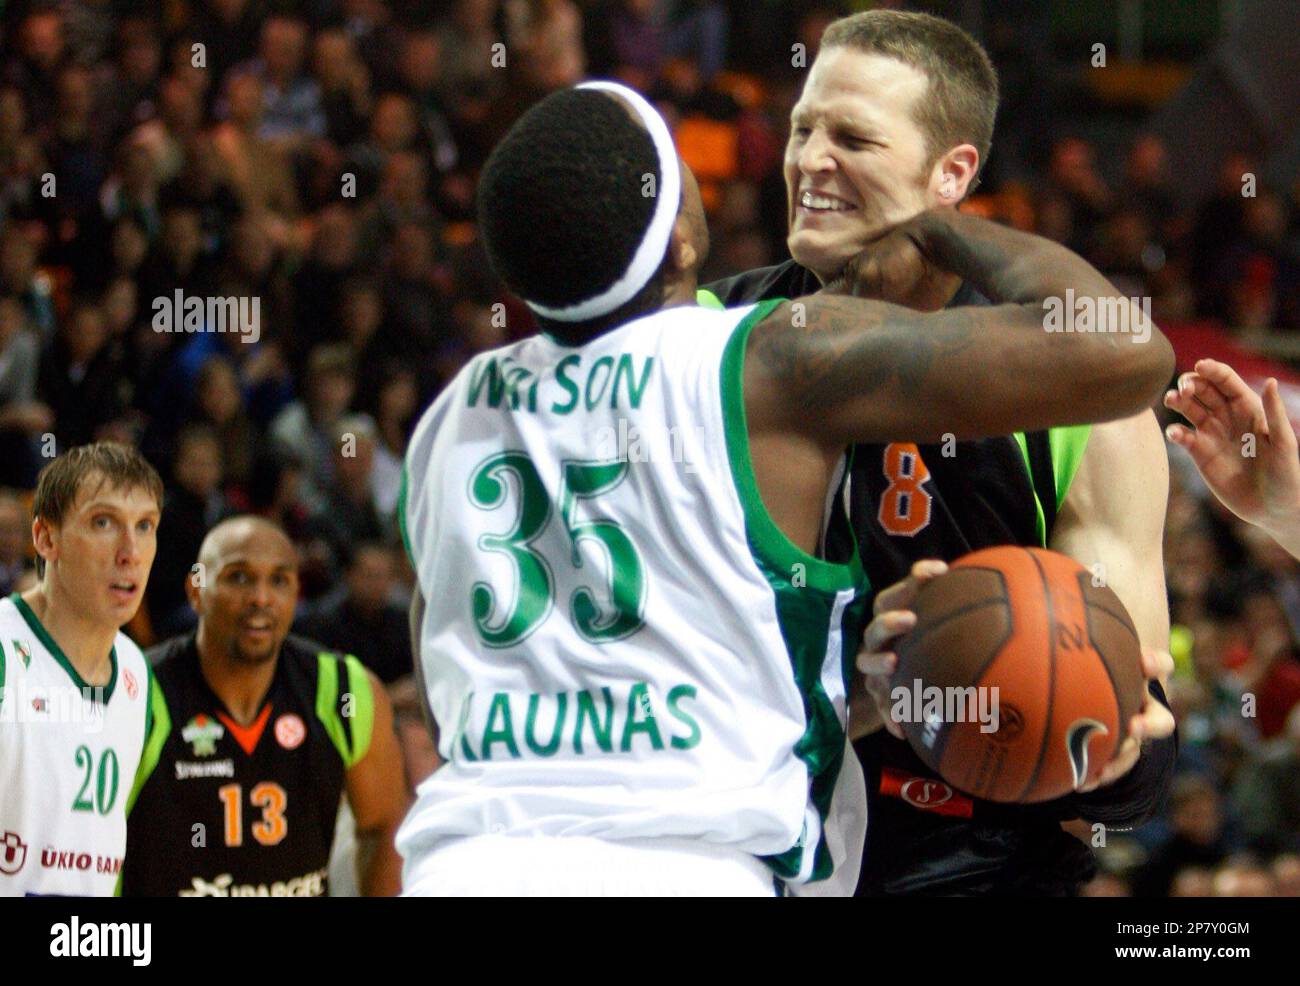 Travis Watson, left, of Lithuanian BC Zalgiris vies for the ball with Curtis Borchardt of French team BC Asvel Villeurbanne during a Euroleague match in Kaunas, Lithuania,Wednesday, Oct. 21, 2009. (AP Photo/Mindaugas Kulbis) Stock Photo